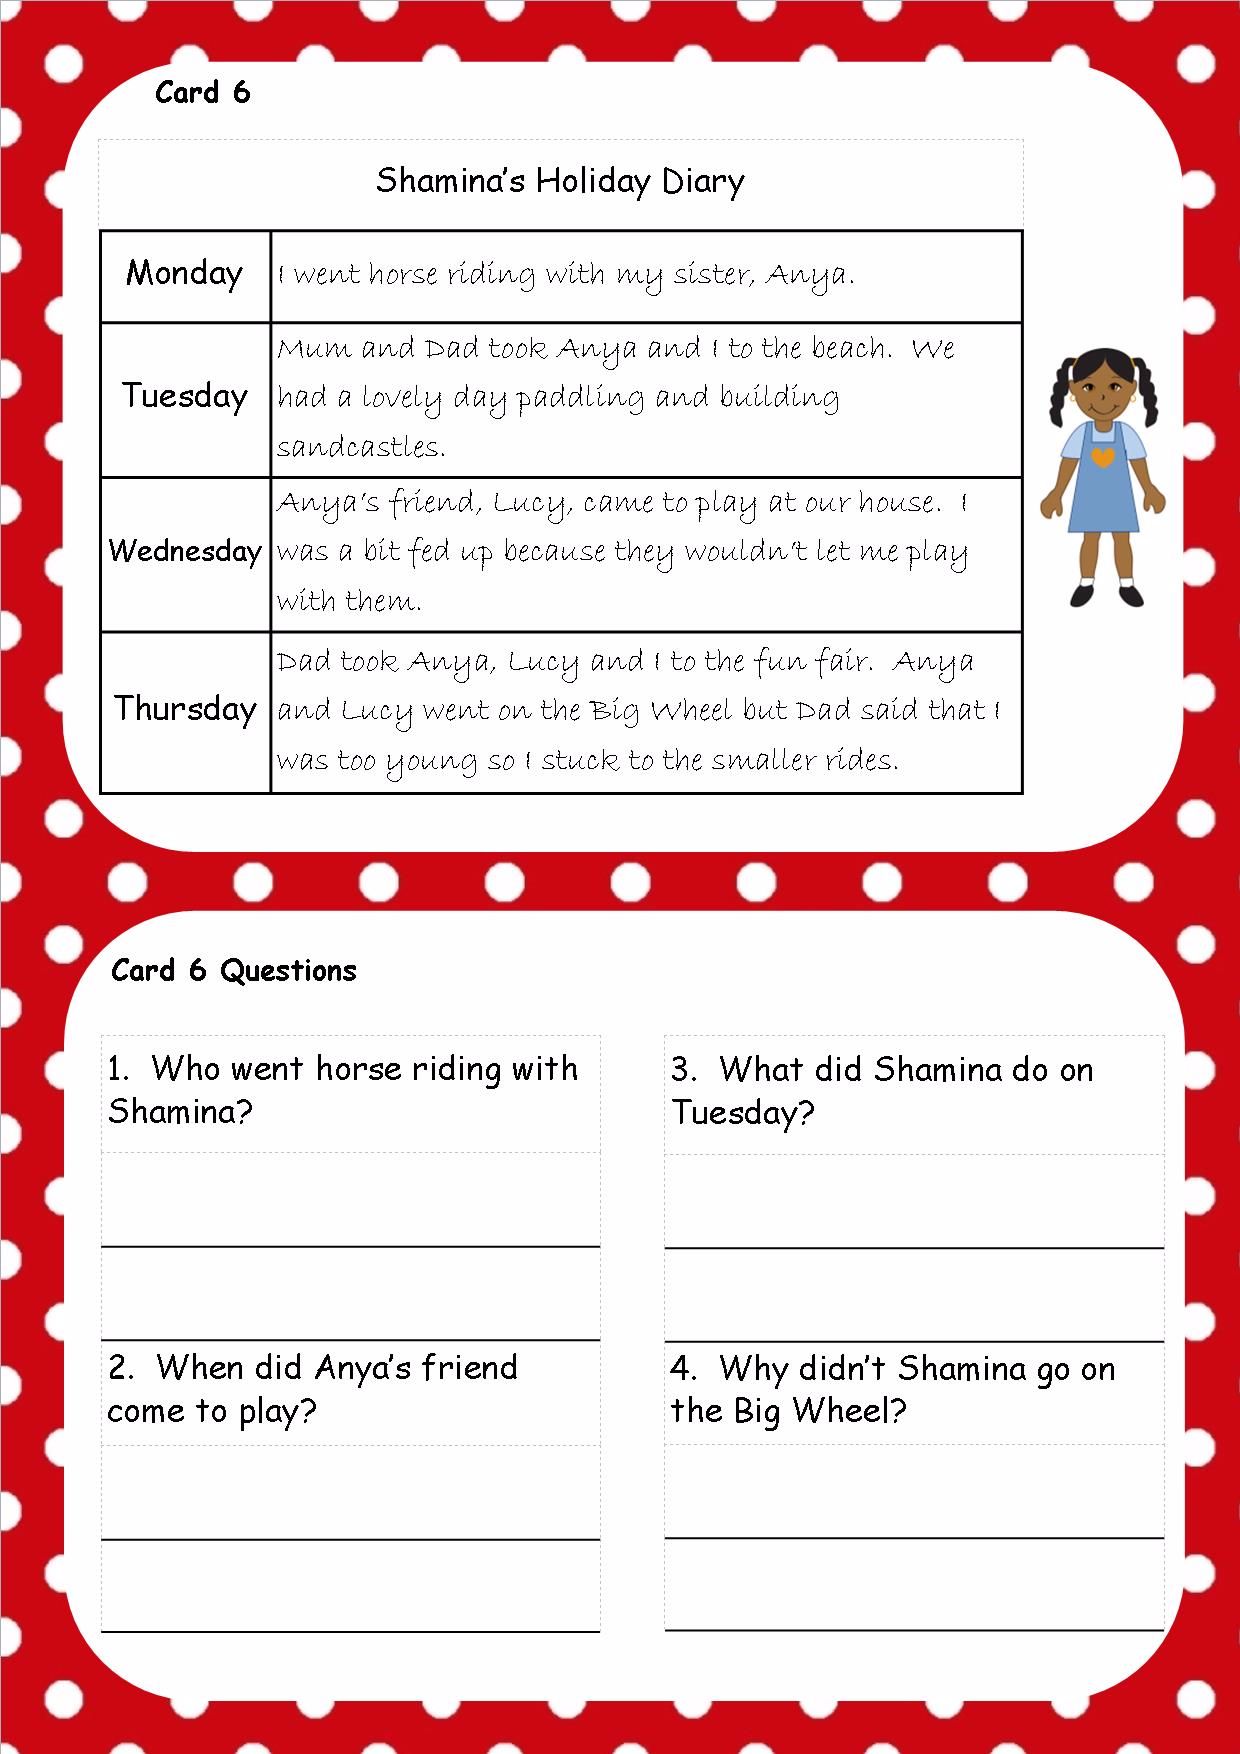 ks1-ks2-sen-ipc-reading-comprehension-cards-guided-reading-writing-spelling-punctuation